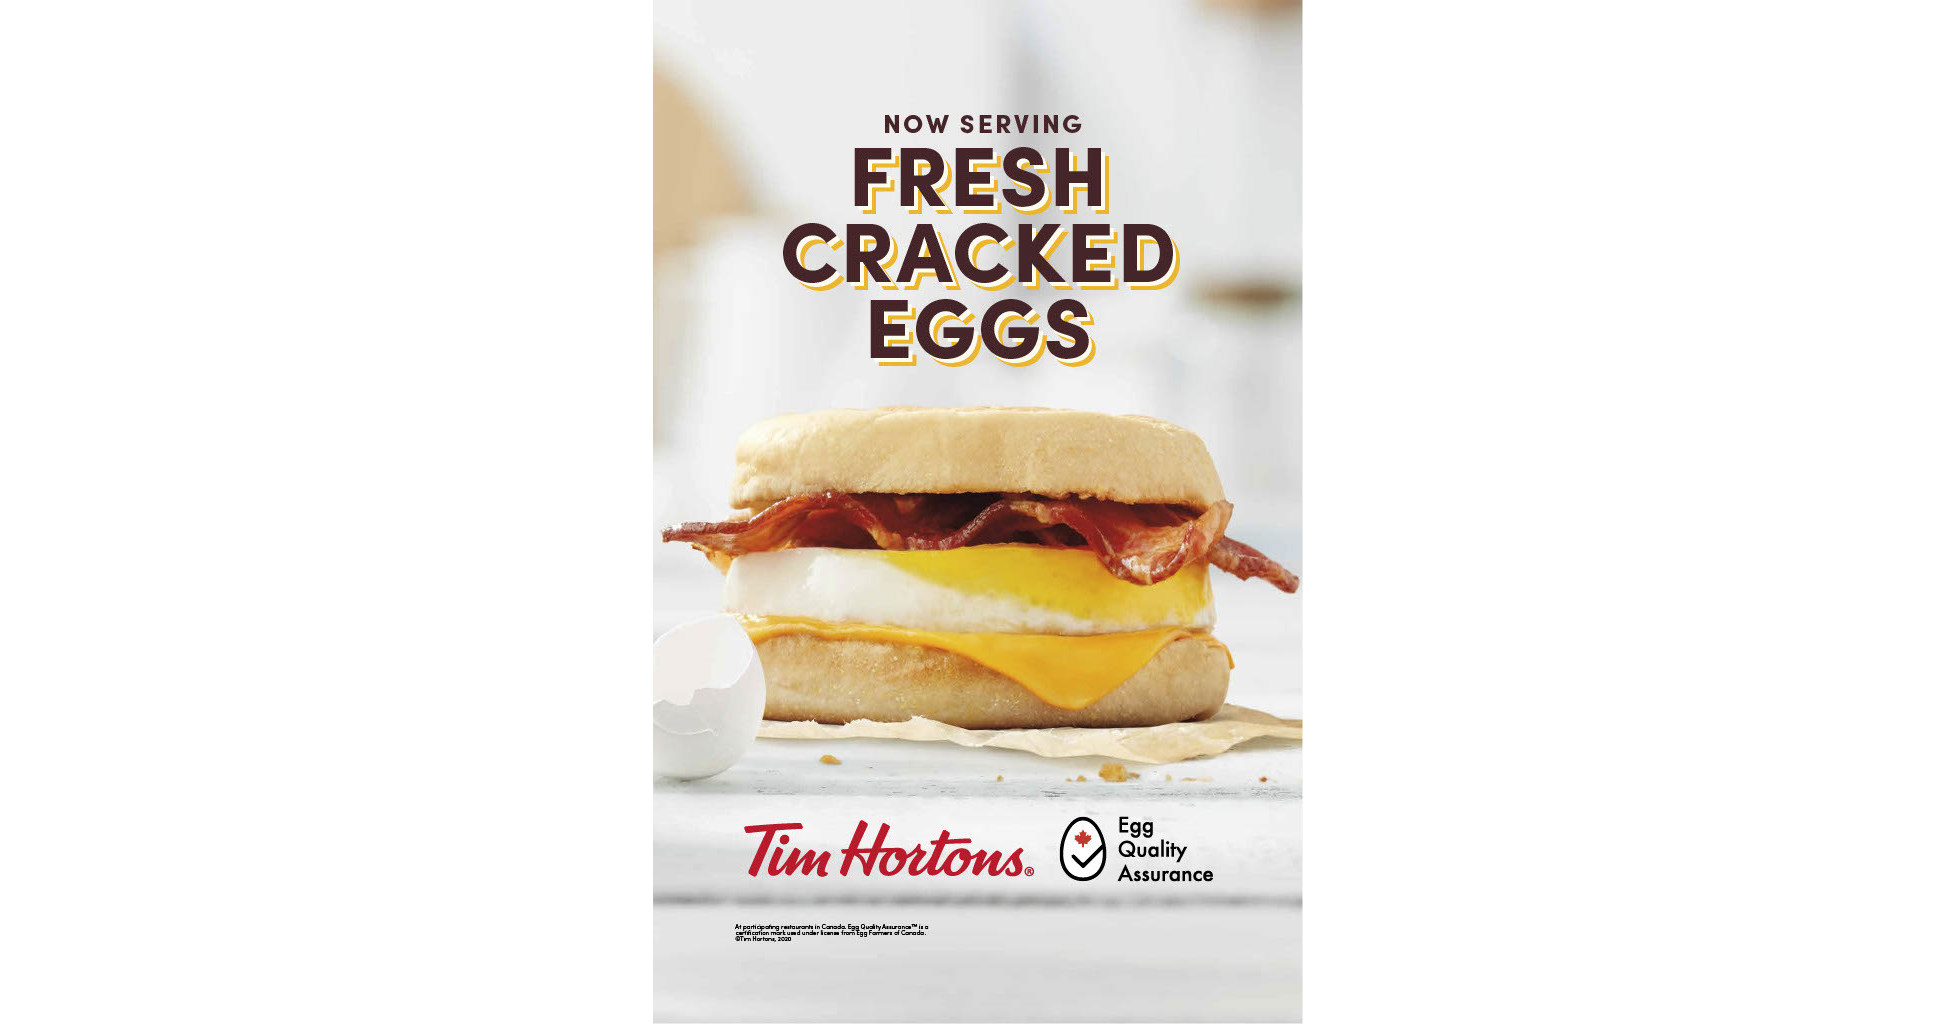 TIM HORTONS® RESTAURANTS ACROSS THE U.S. ARE NOW PROUDLY SERVING FRESHLY  CRACKED EGGS IN ALL